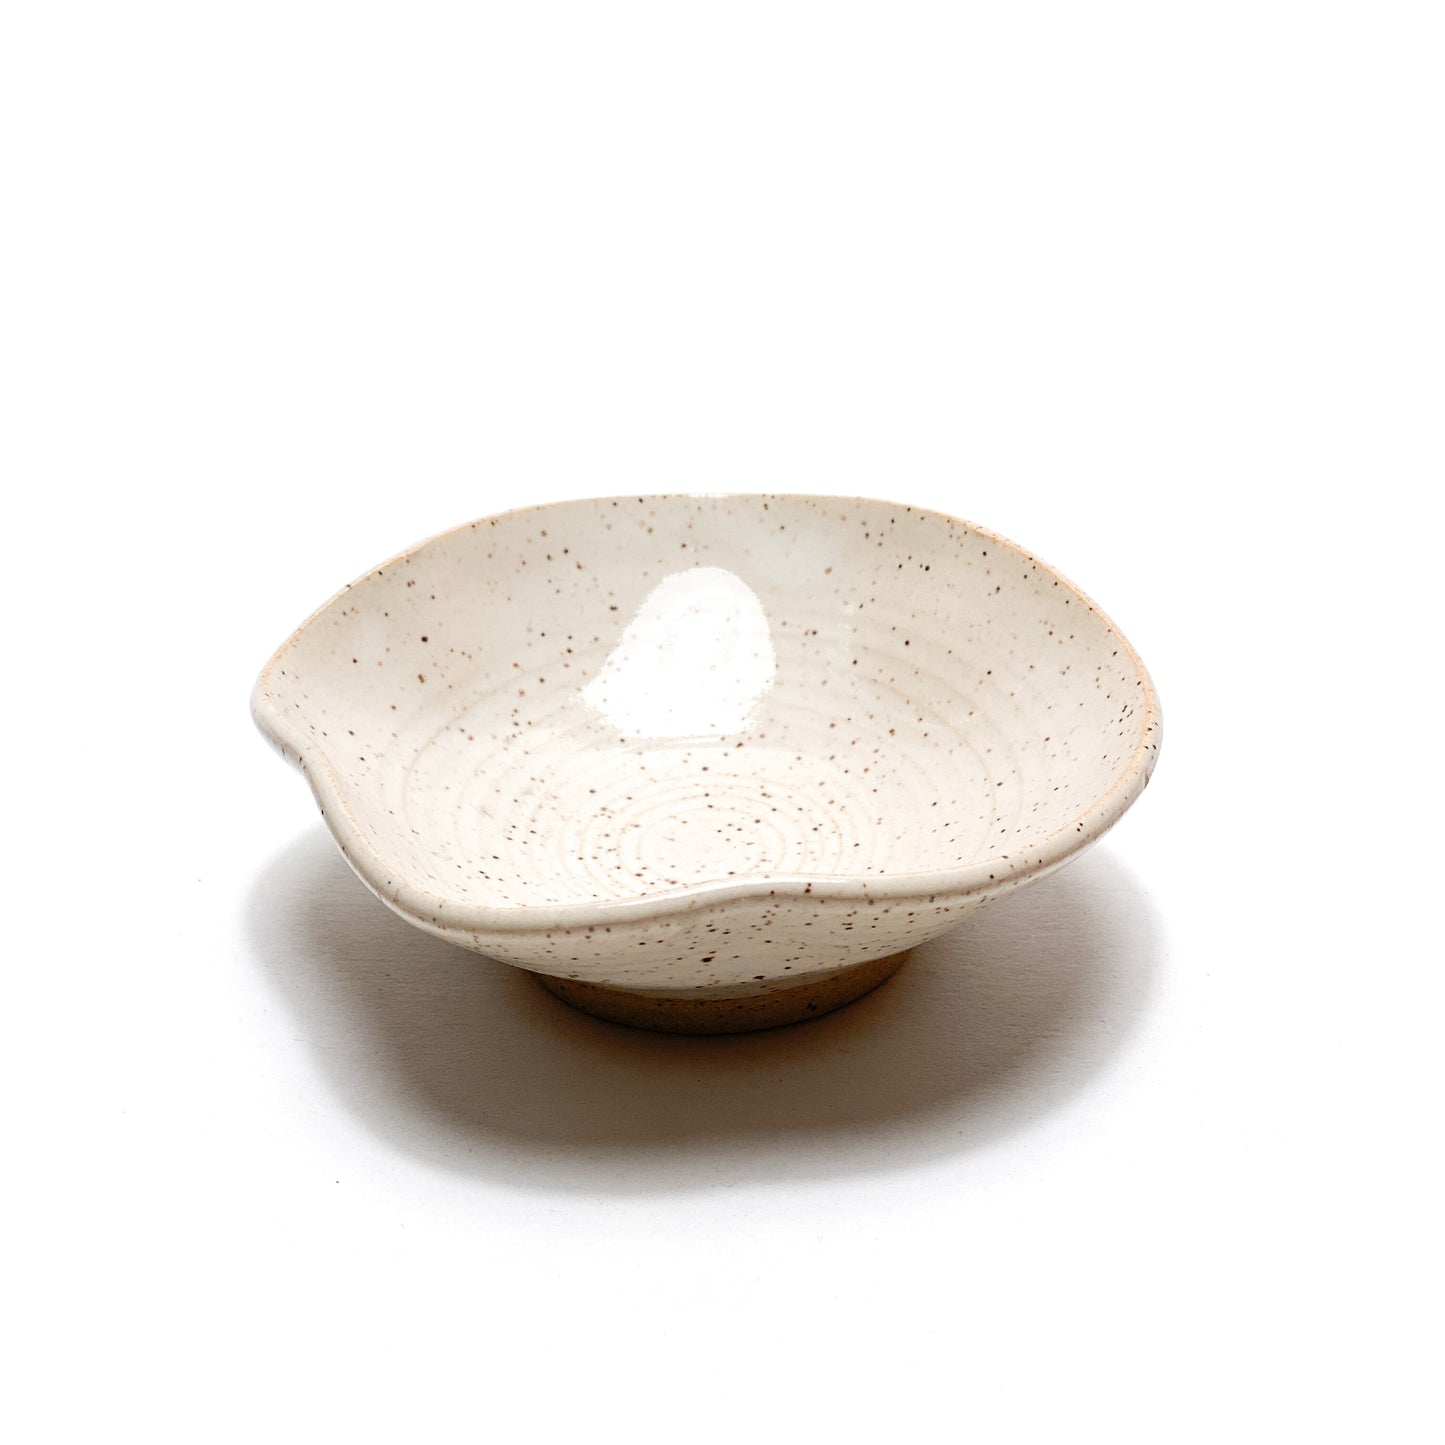 Sydsicle Ceramics Natural Speckle Jewelry Bowl